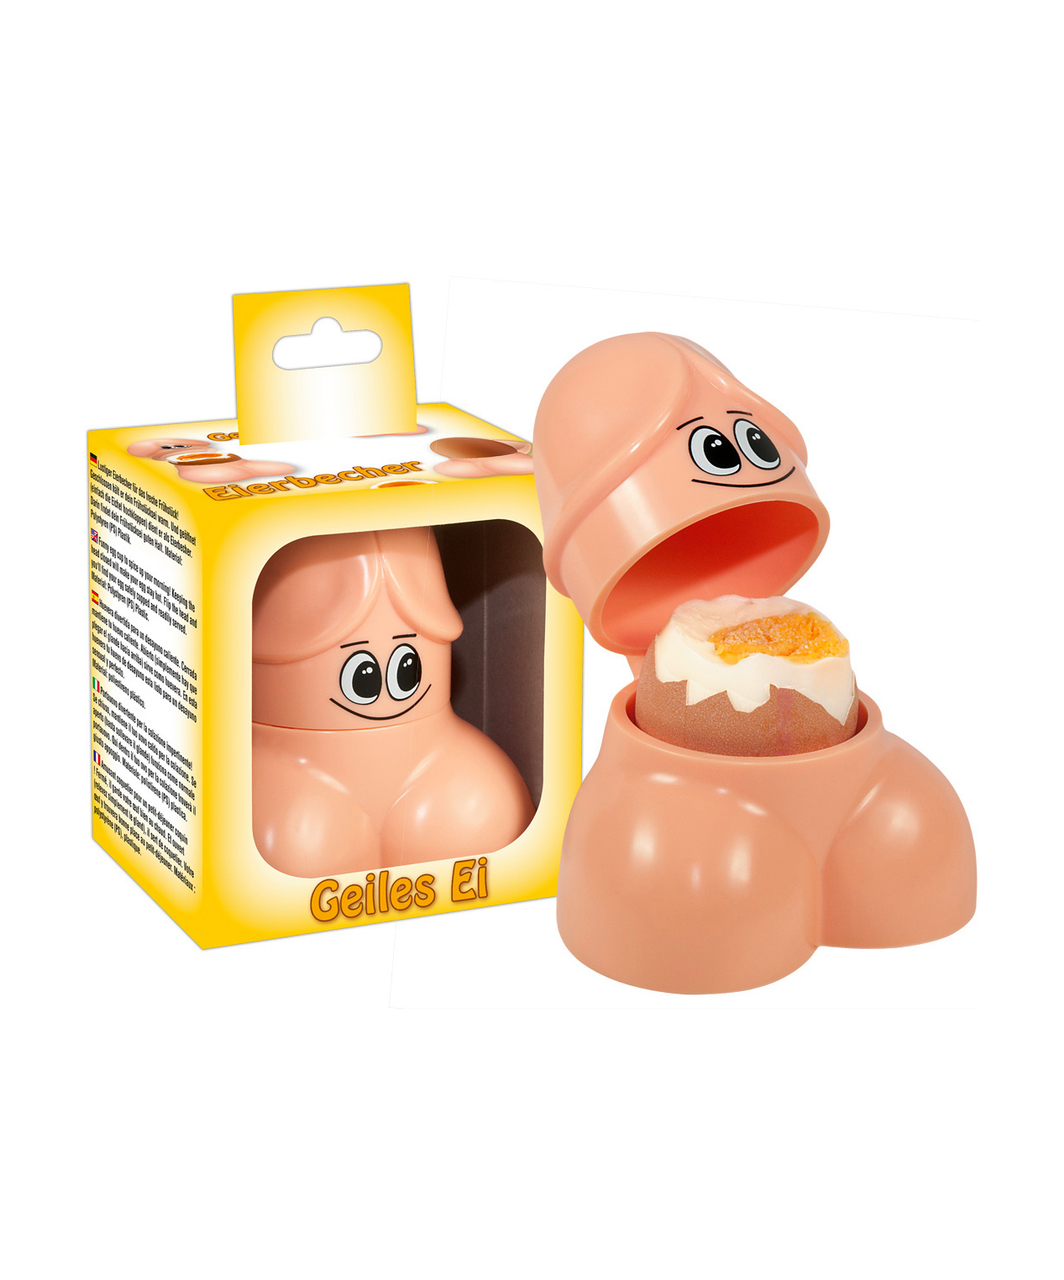 OV Penis/testicle-shaped egg cup